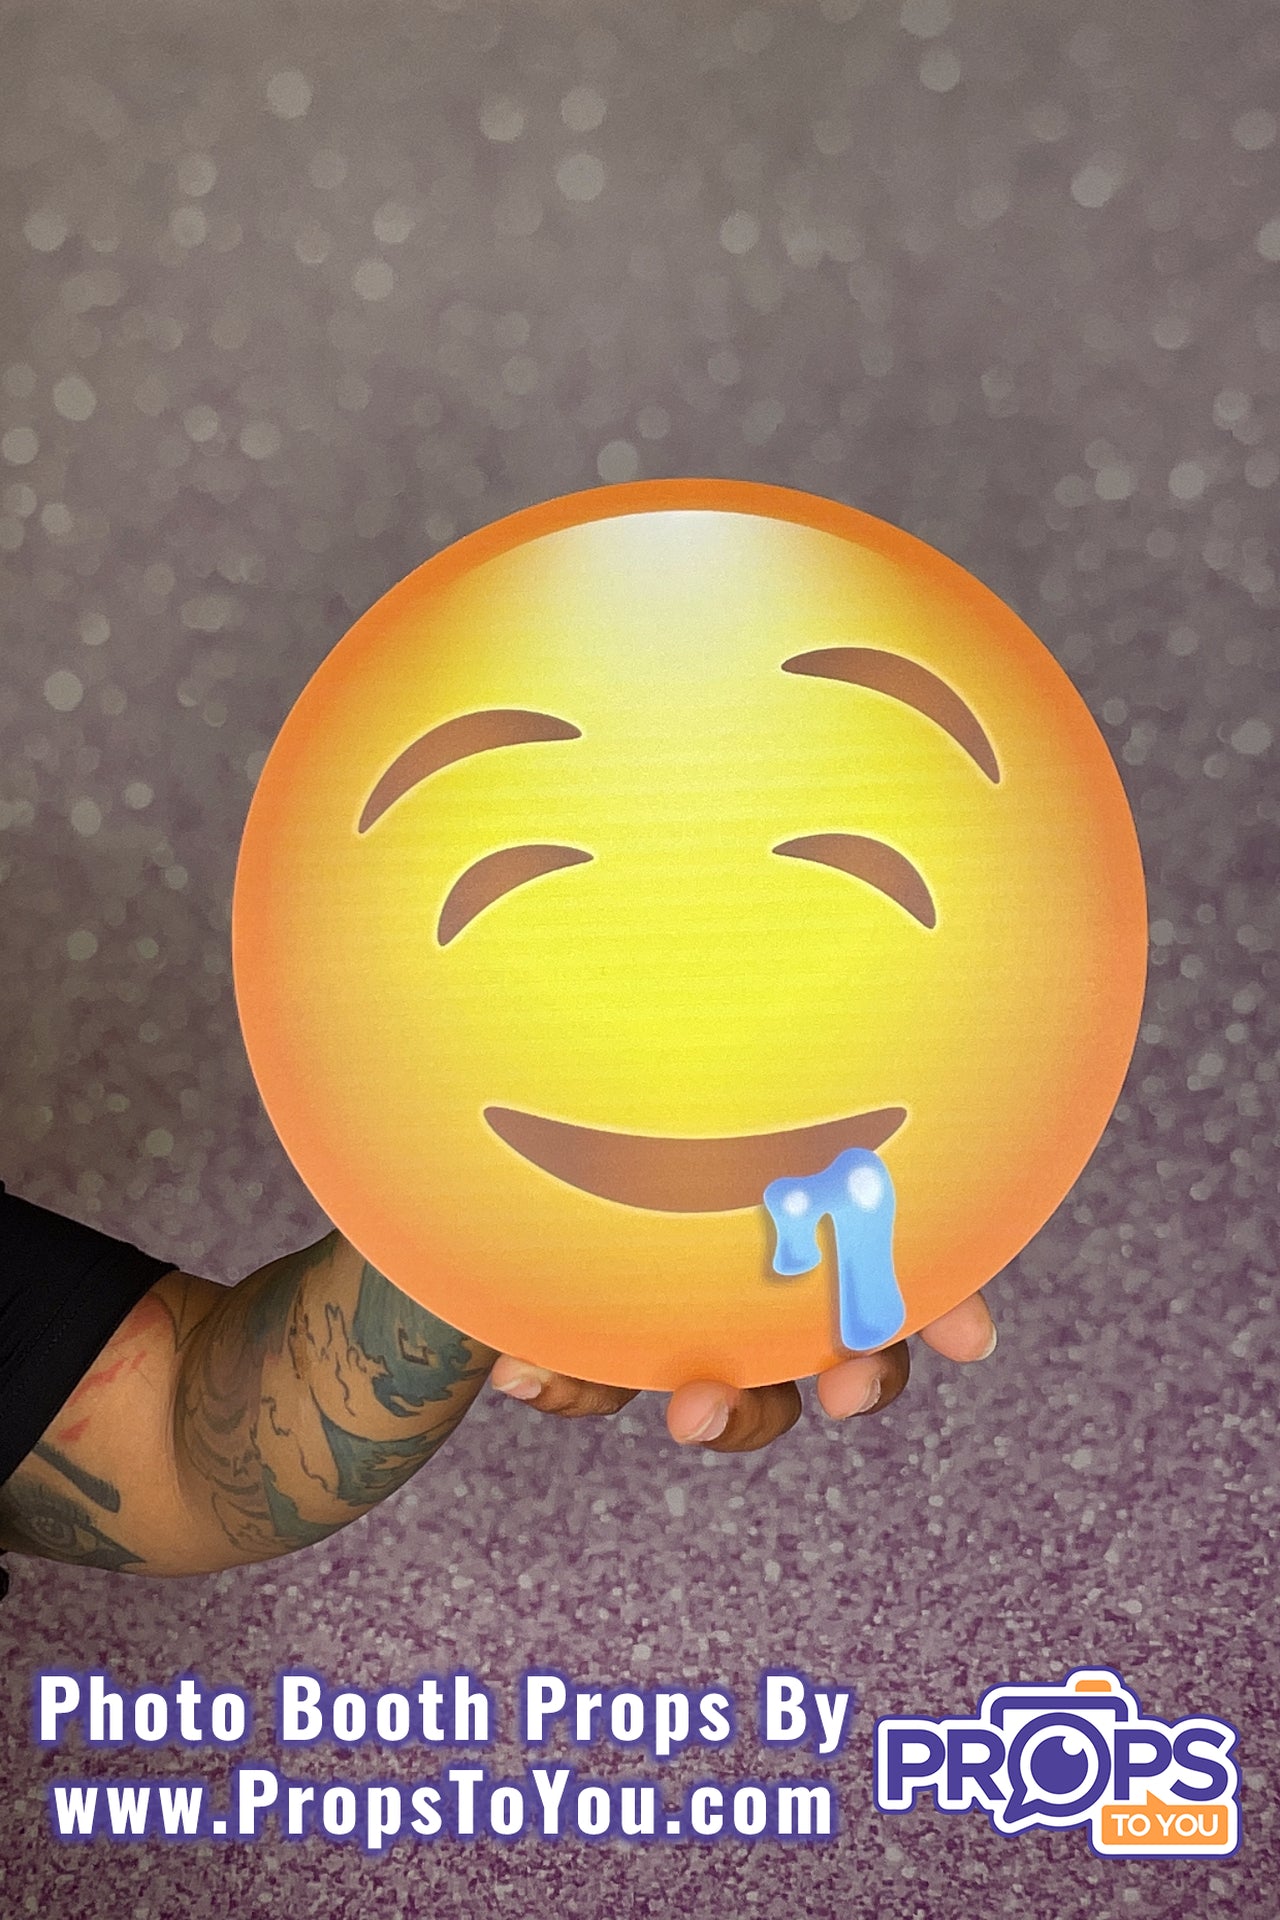 Emoji 4: BUNDLE 5 Double-Sided Photo Booth Props